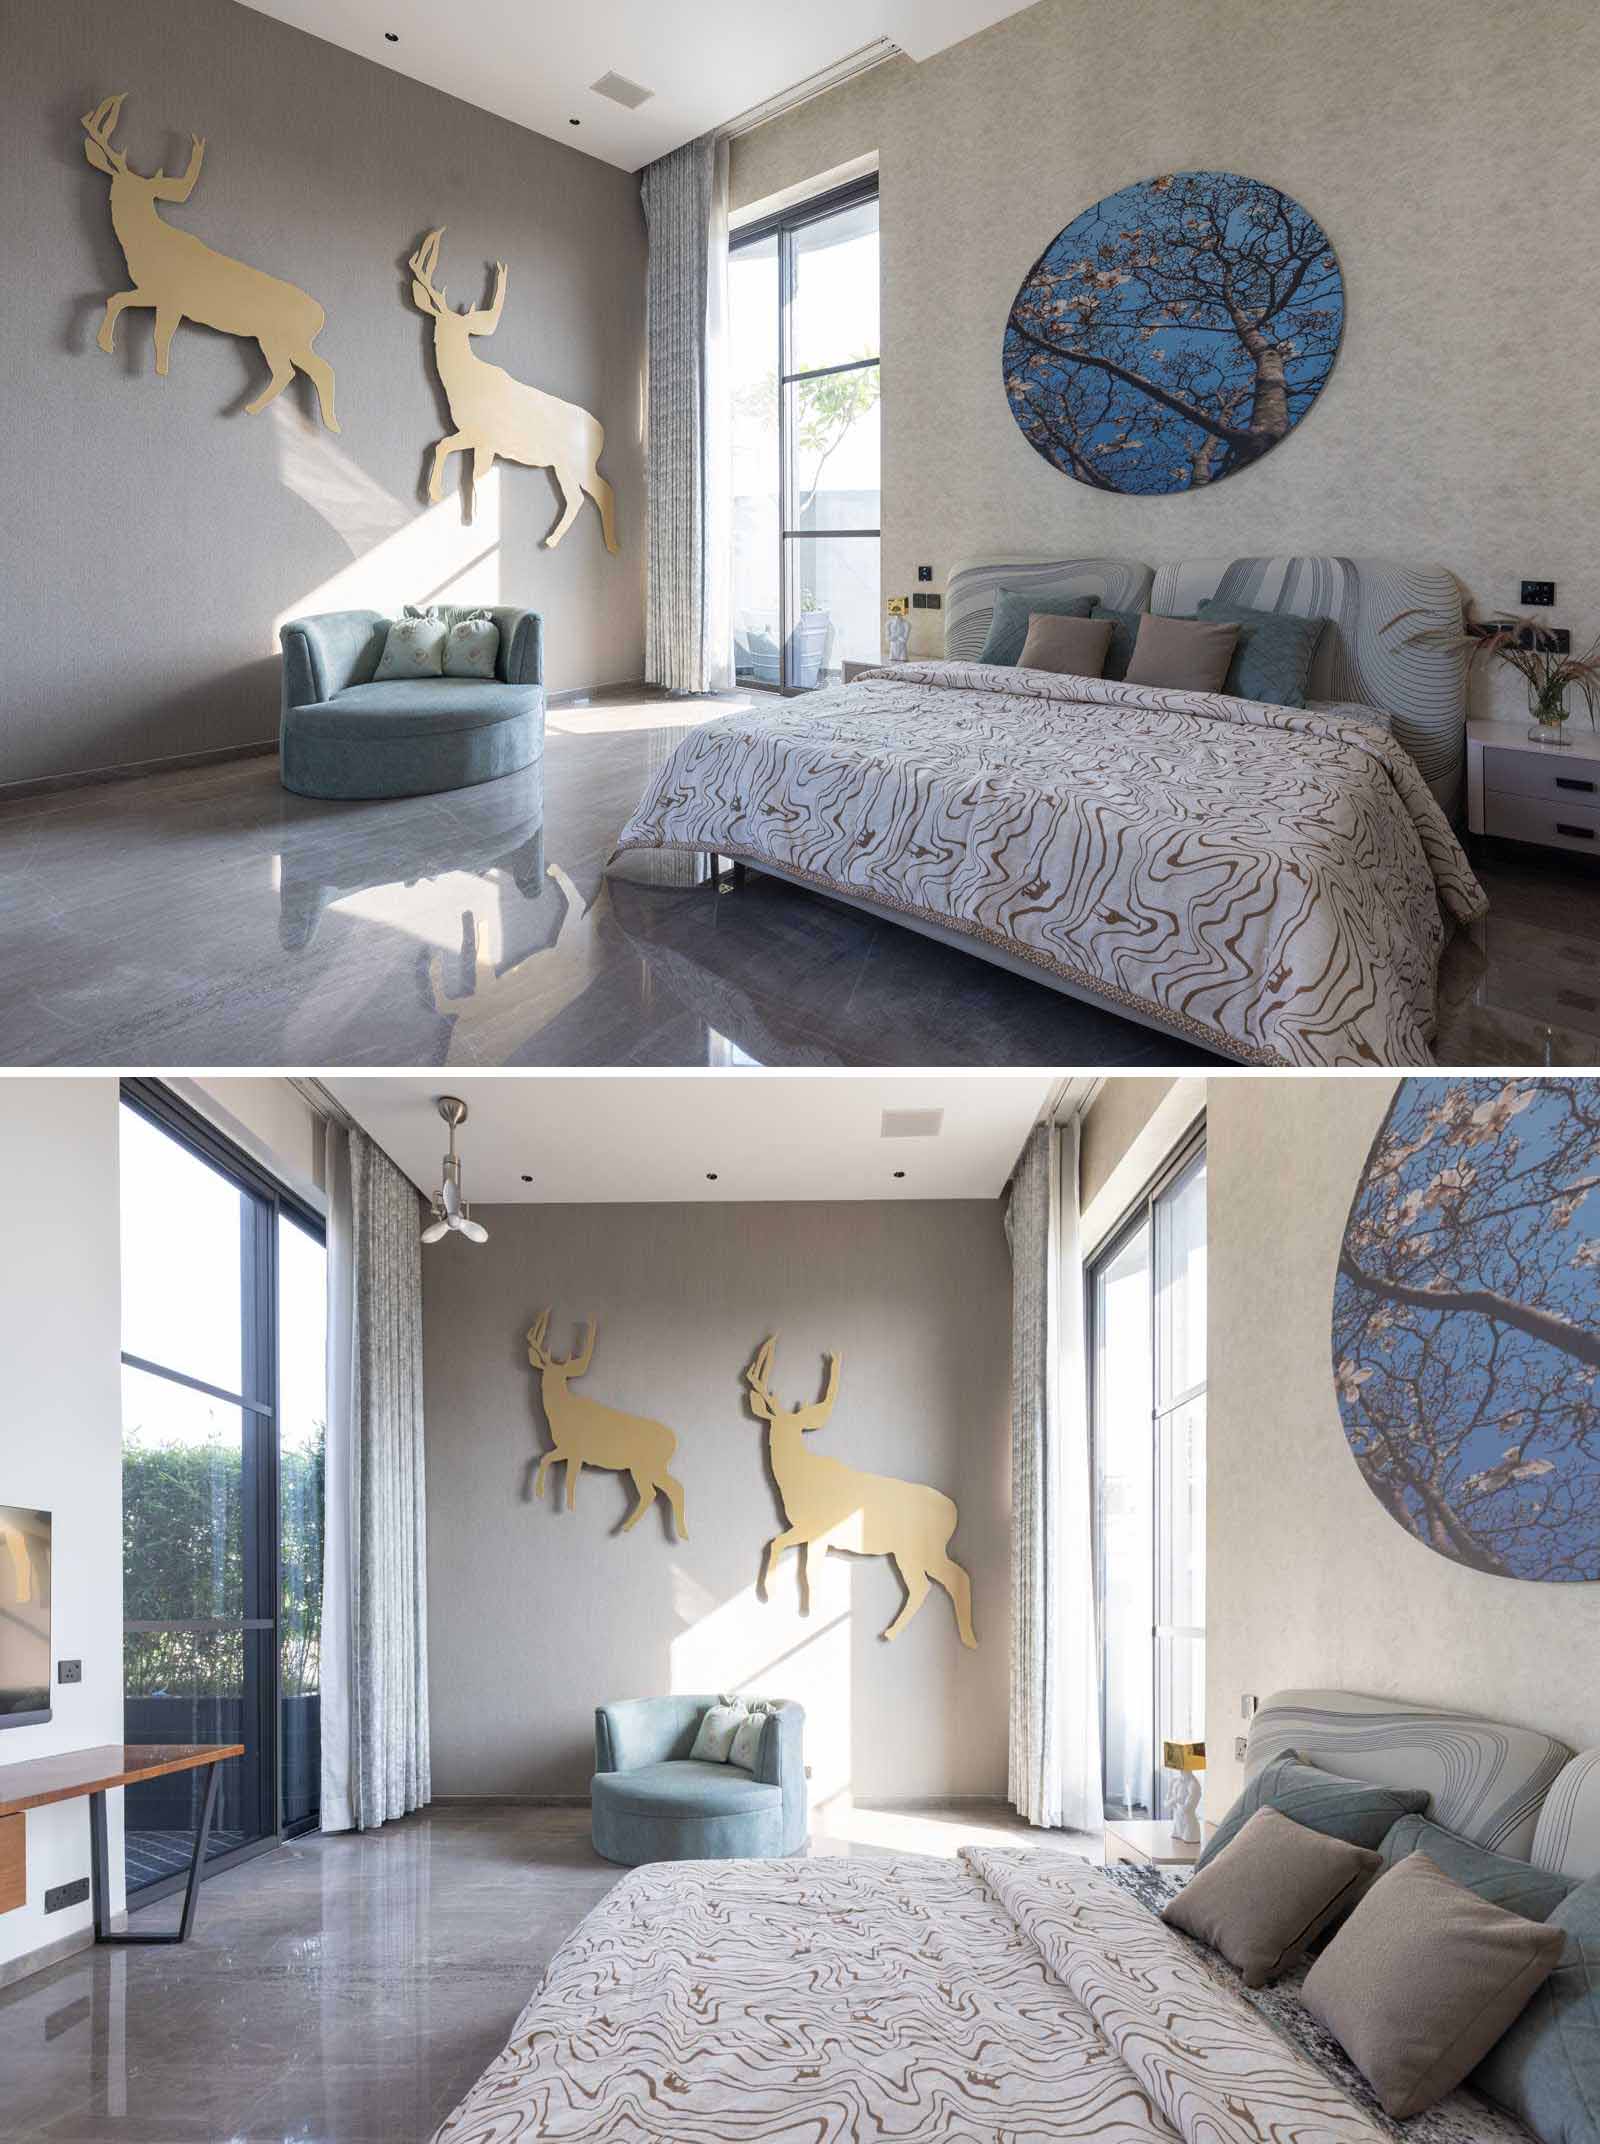 A contemporary bedroom with large art pieces.